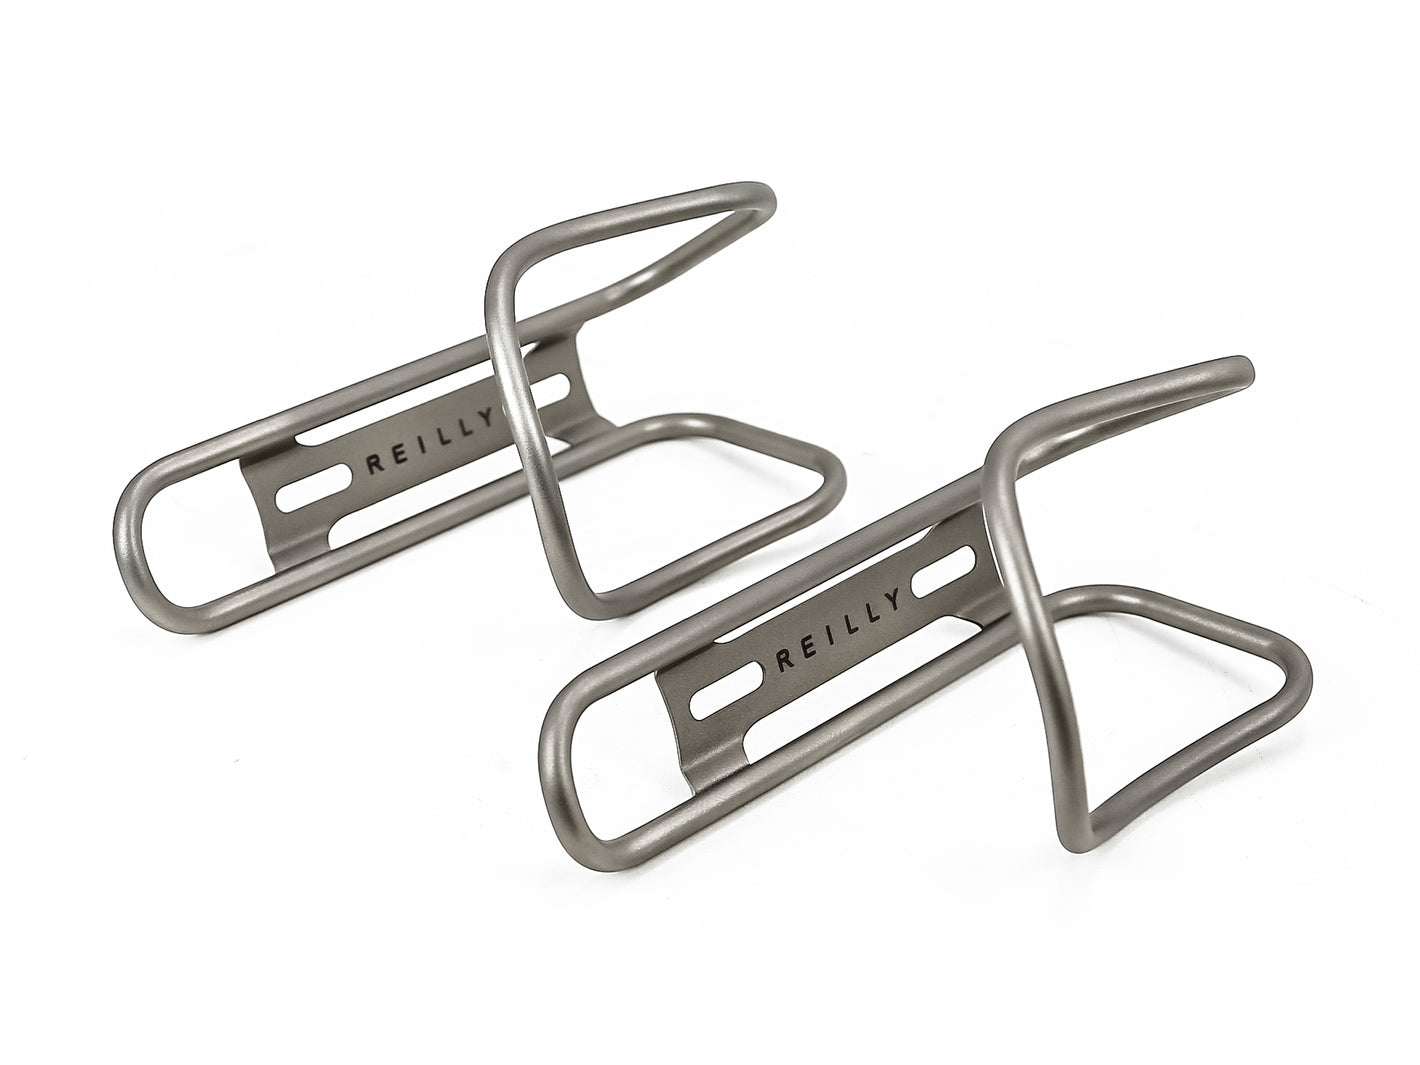 Reilly branded titanium bottle cages on white background 